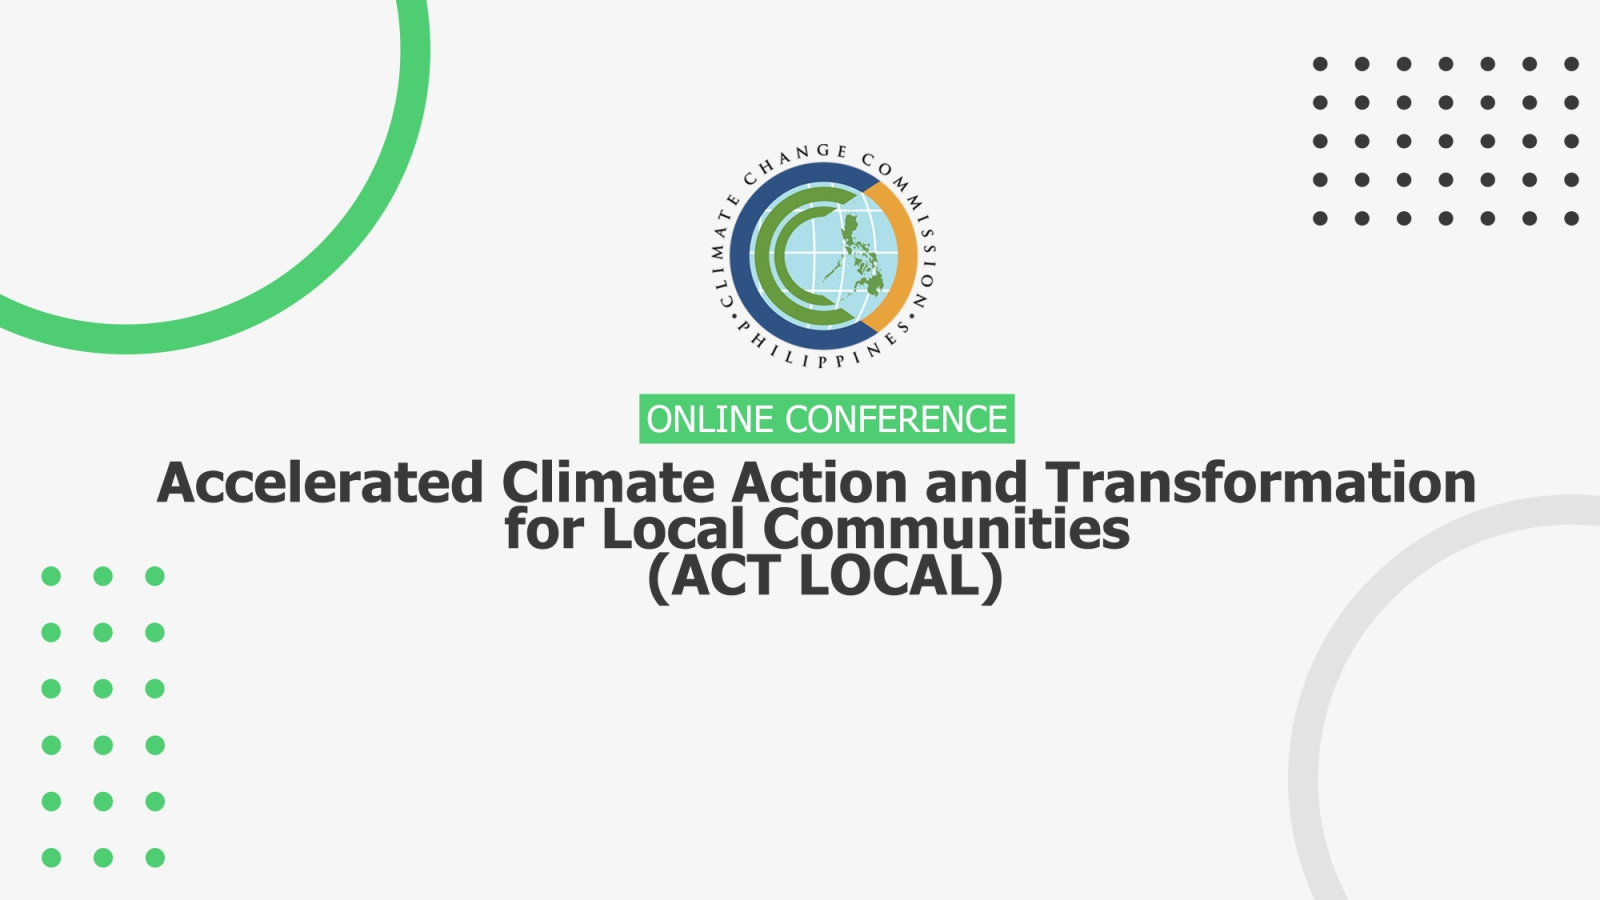 Week 4 ACT LOCAL - Accelerated Climate Action and Transformation for Local Communities